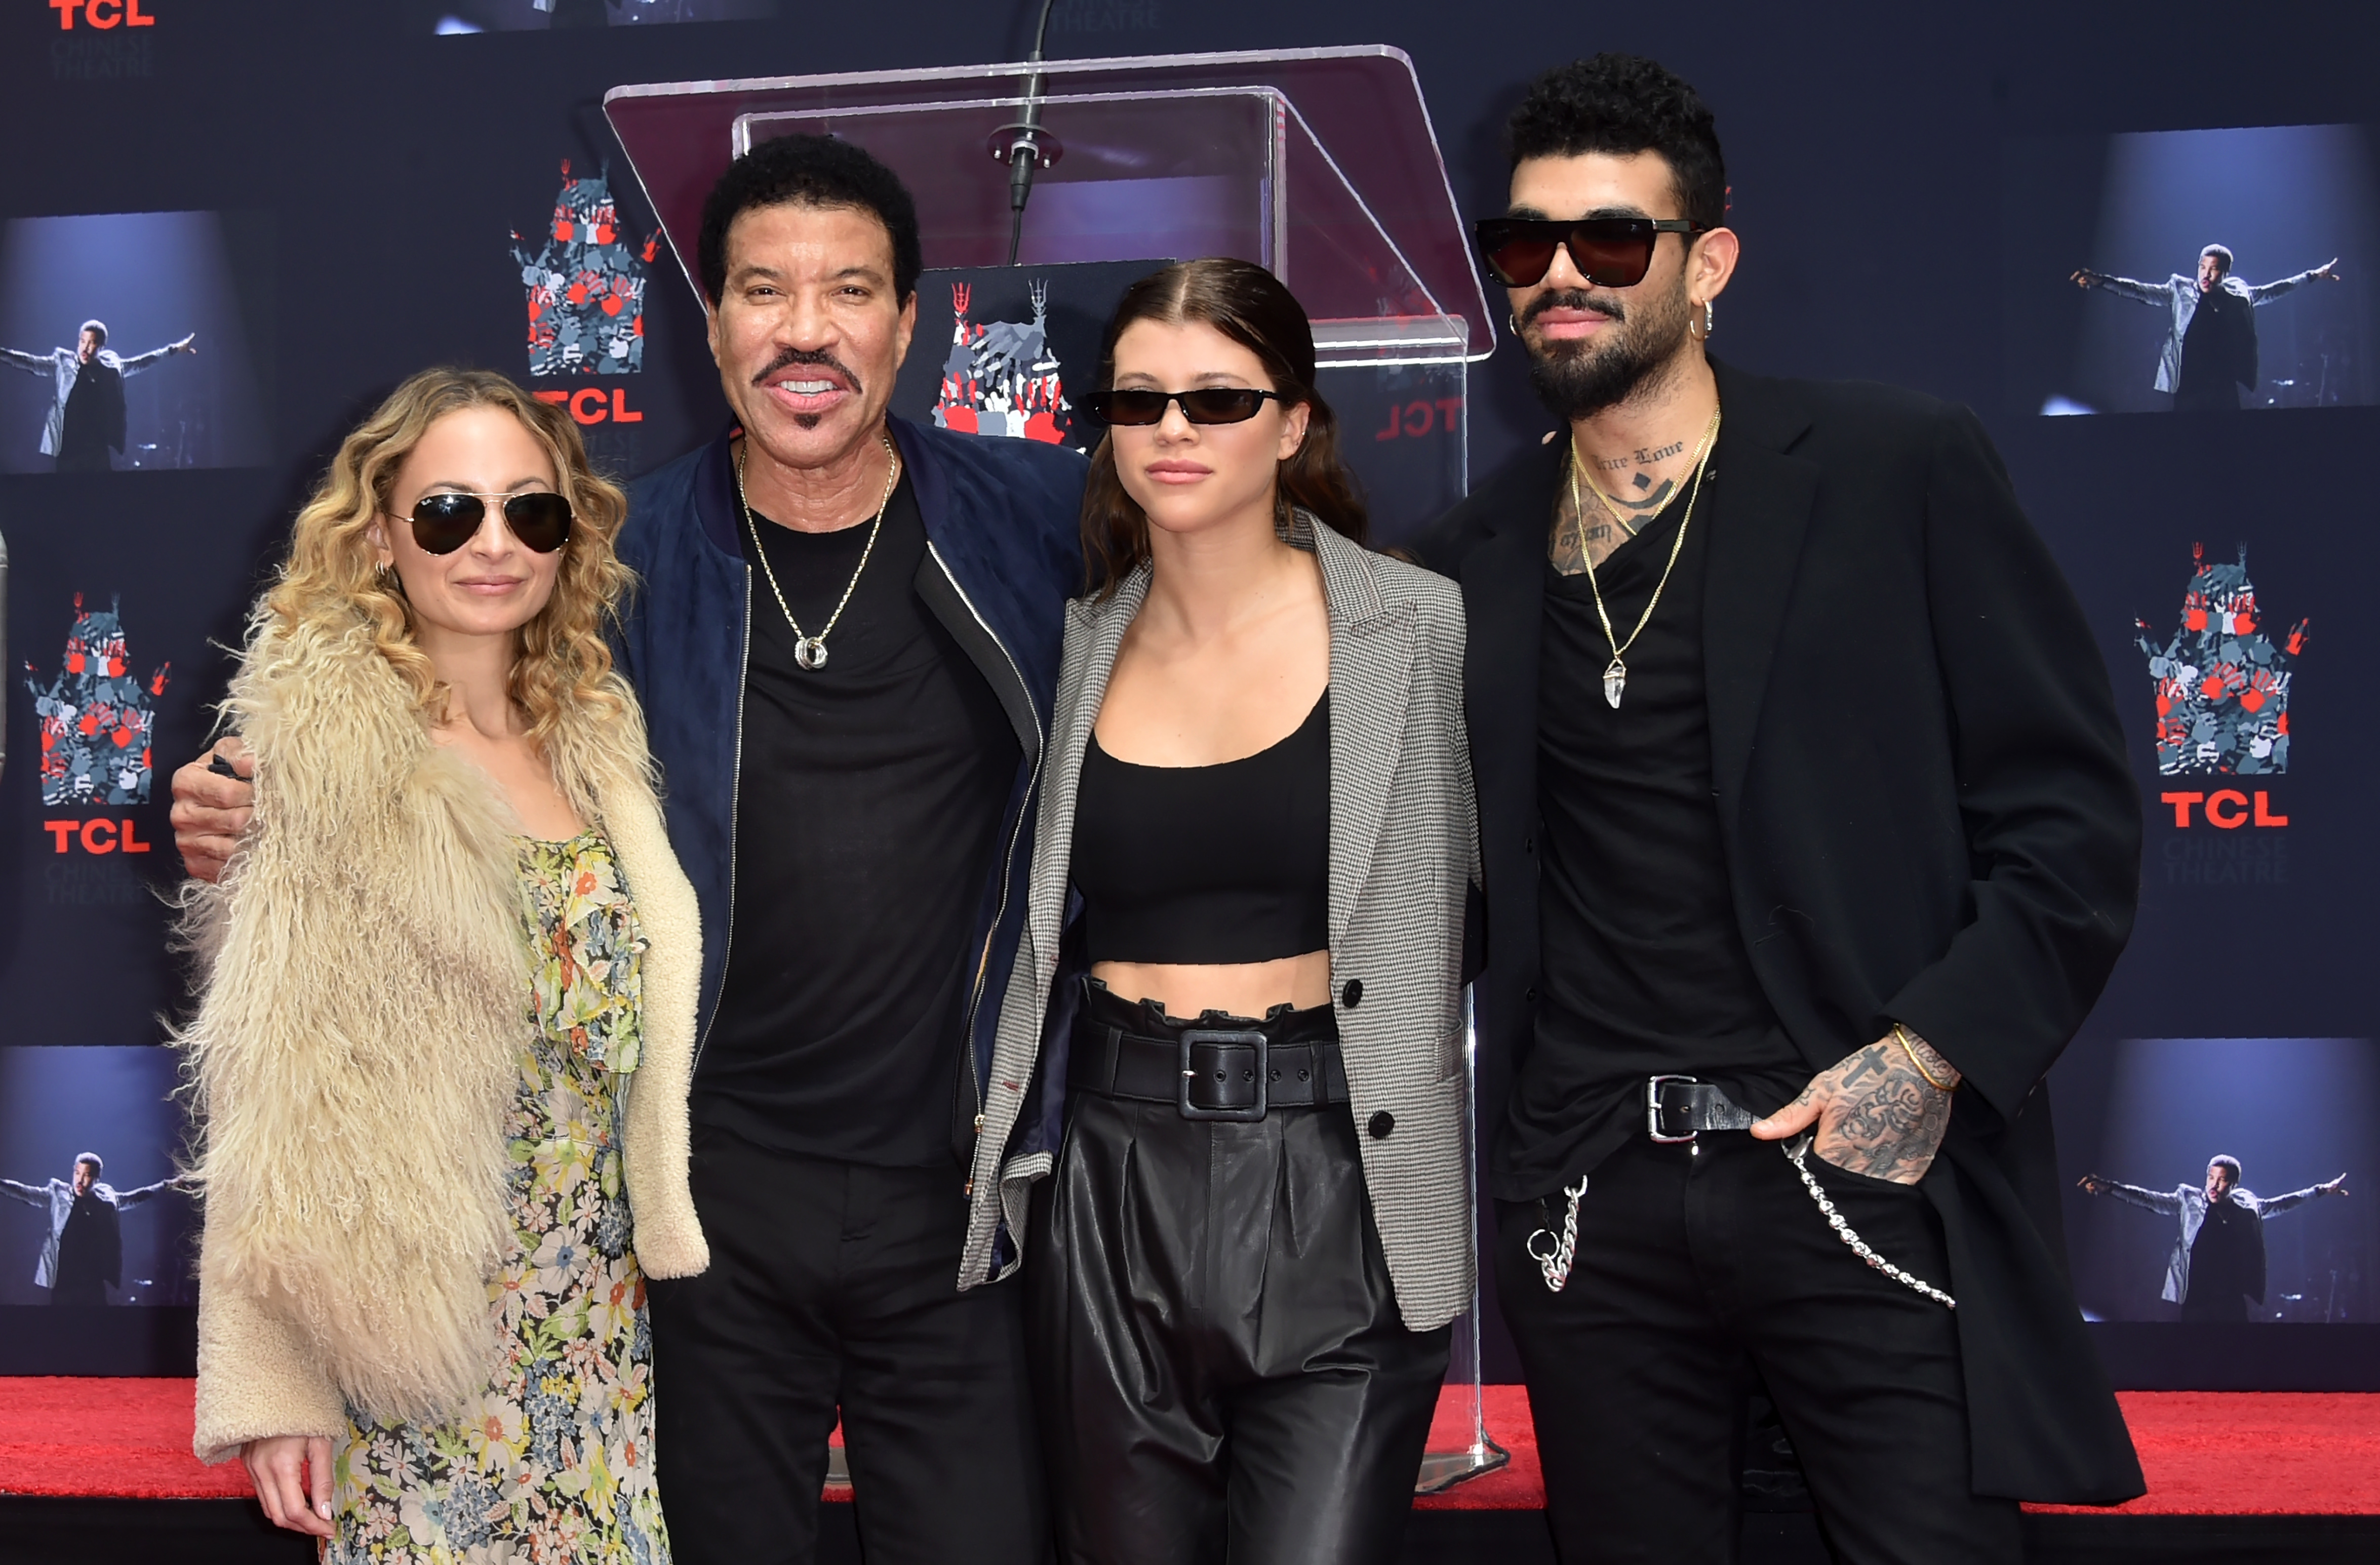 Nicole Richie, Lionel Richie, Sofia Richie and Miles Richie pose at his Hand and Footprints ceremony at the TCL Theater on March 7,2018 in Hollywood, California. | Source: Getty Images